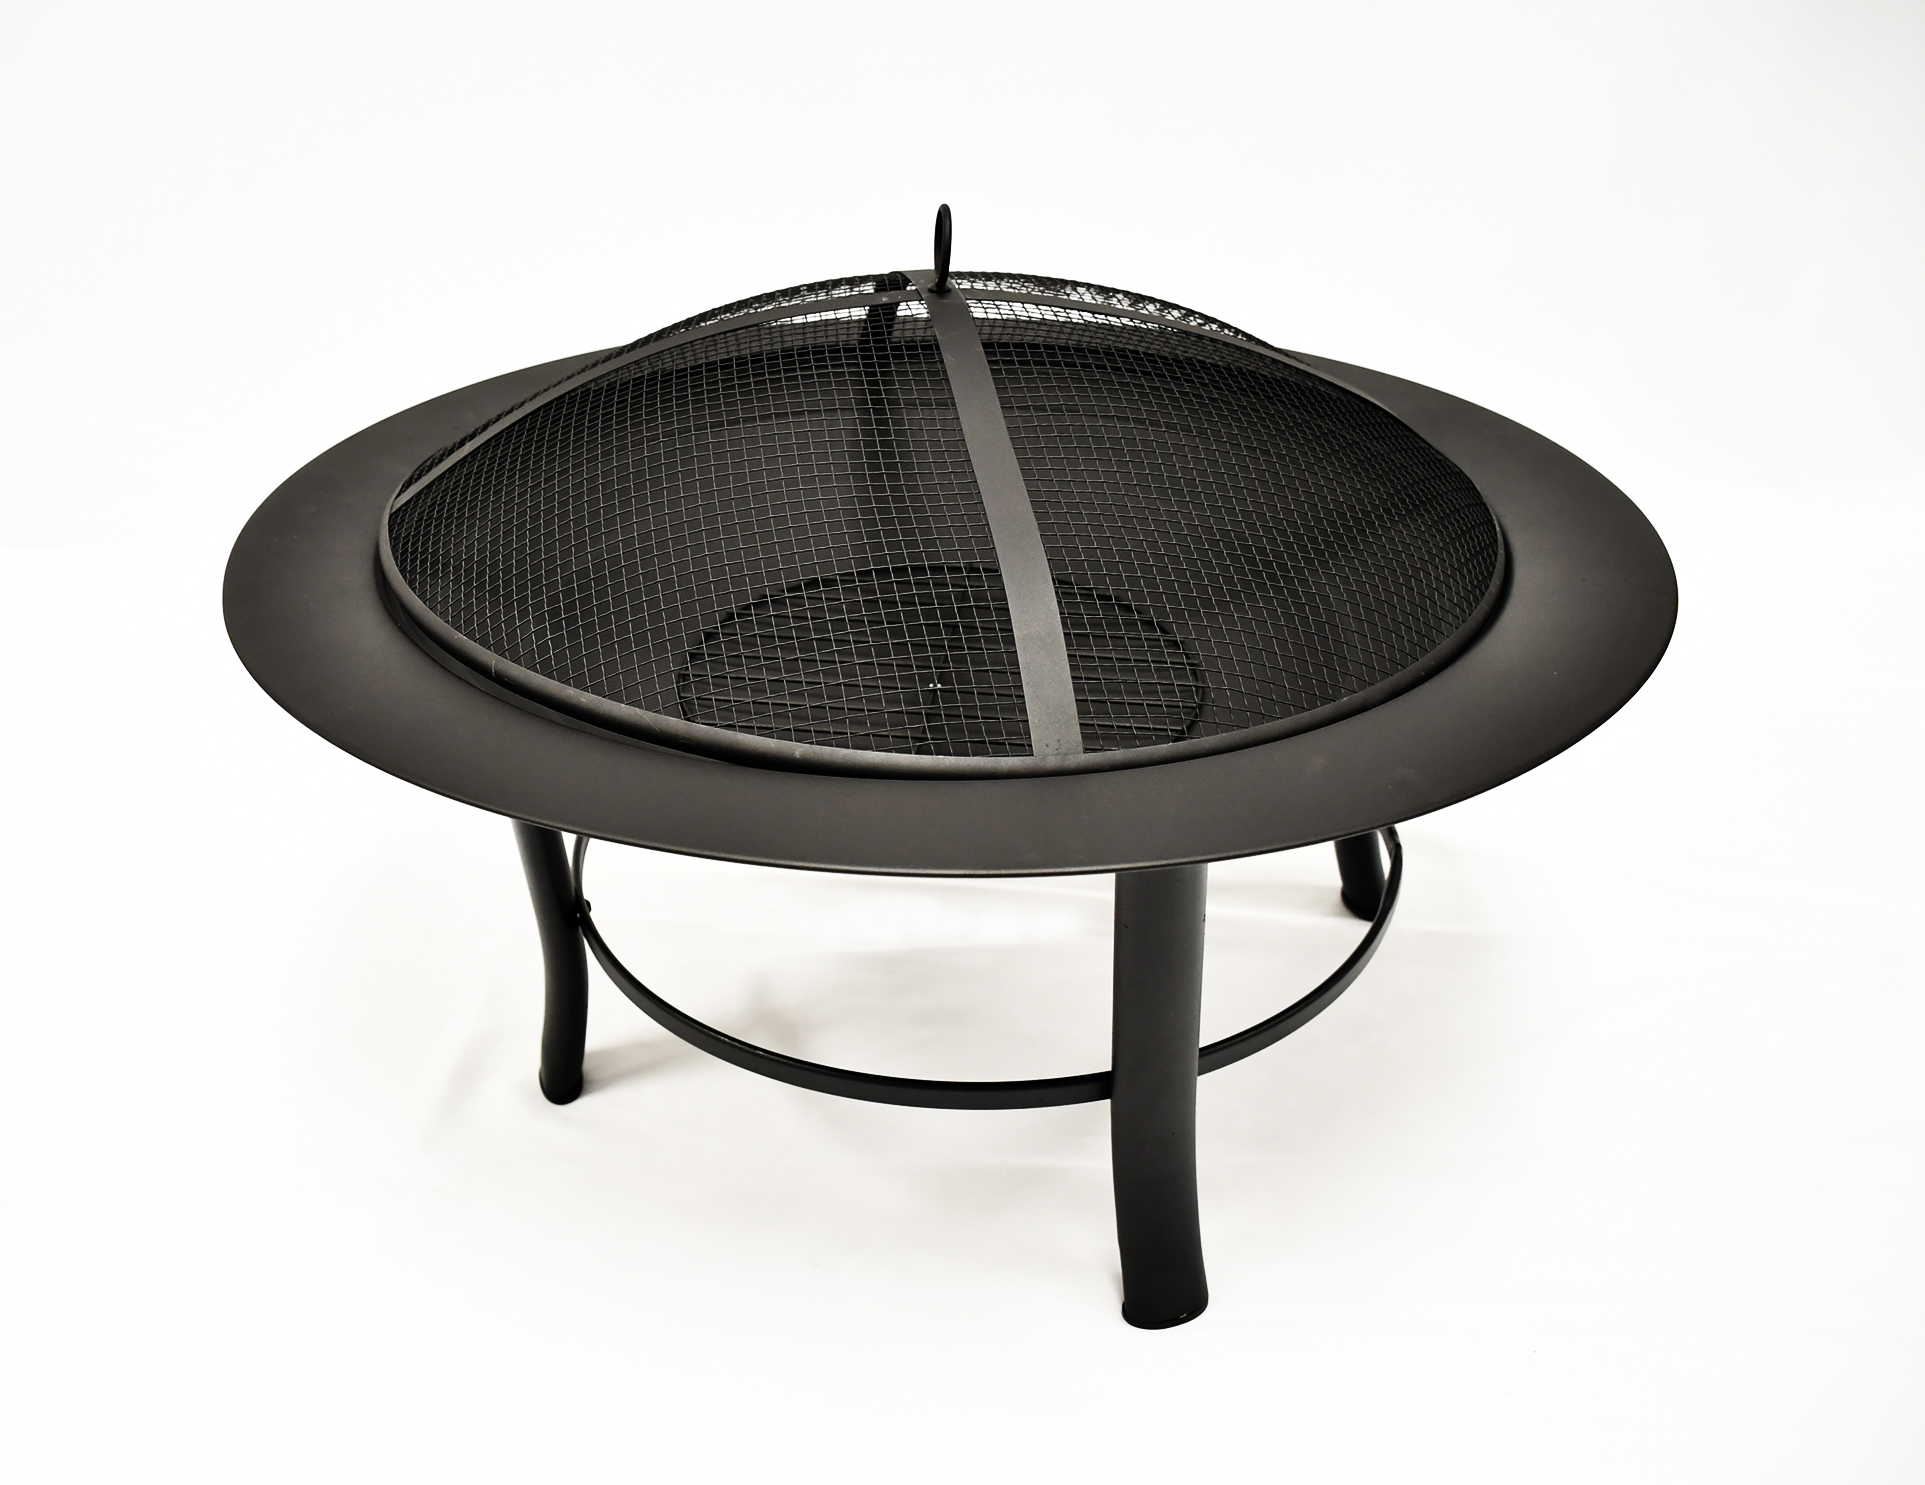 Mainstays 28" Fire Pit with PVC Cover and Spark Guard - image 4 of 11